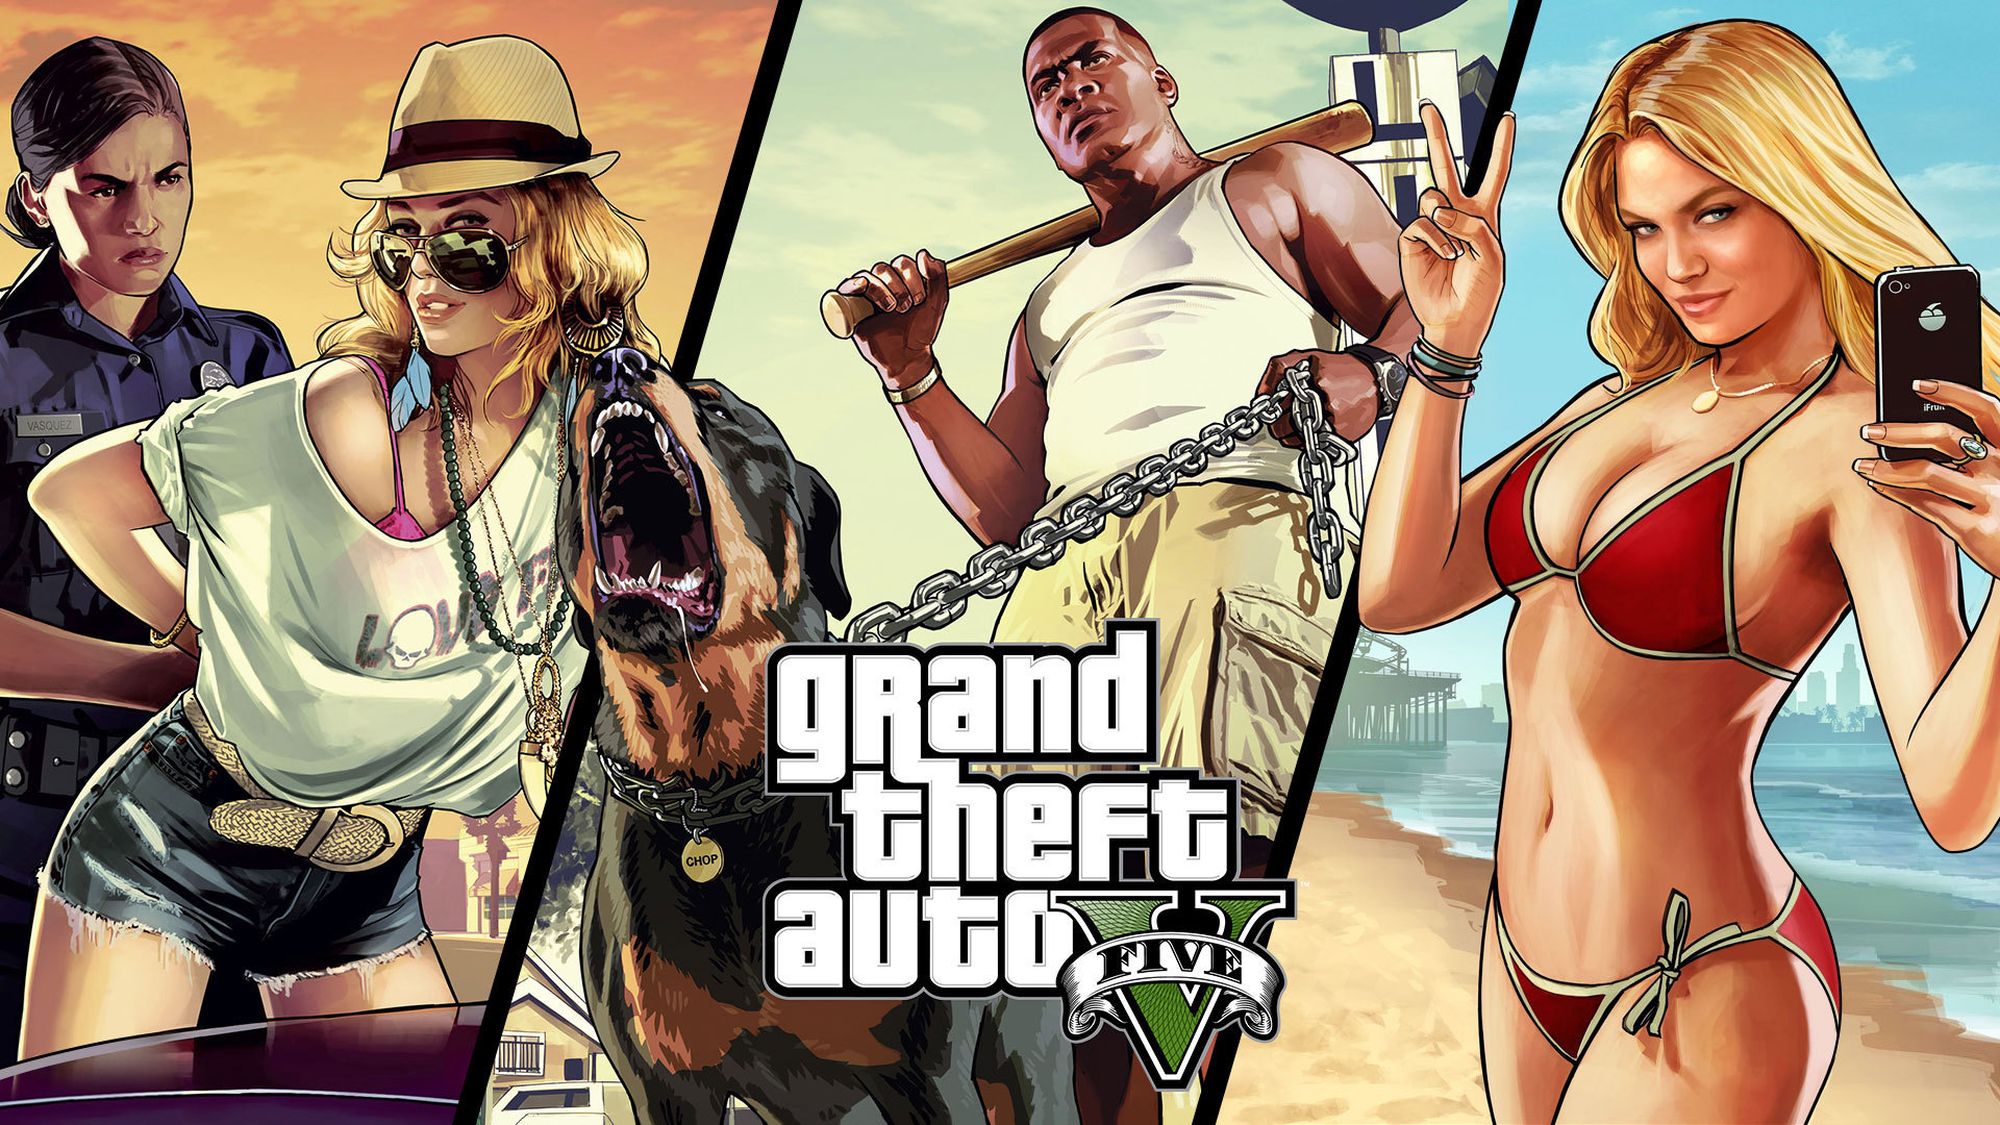 watch, grand theft auto v, bikini, video game, baseball bat, beach, belt, blonde, blue eyes, brown hair, chain, dog, earrings, franklin clinton, hat, long hair, necklace, peace sign, phone, police, ring, shorts, sky, smile, sunglasses, grand theft auto 2160p